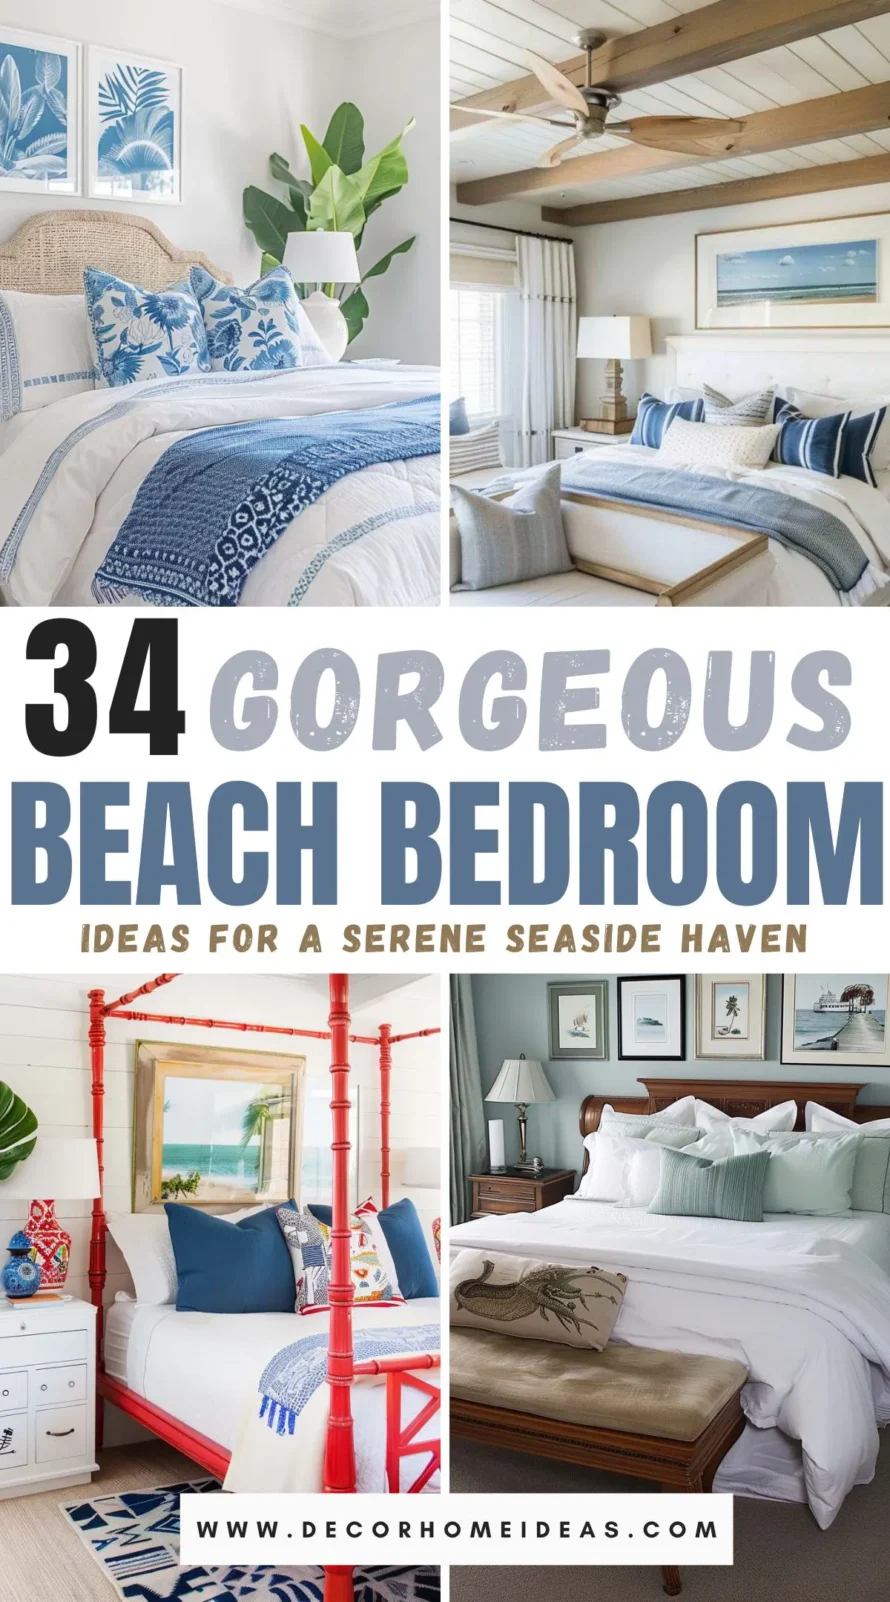 Transform your master bedroom into a serene seaside haven with these 34 gorgeous beach-inspired ideas. Discover soothing color palettes, coastal decor, and clever design tips to create a relaxing retreat that captures the essence of the shore. Dive in to explore how you can bring the tranquility of the beach to your home!